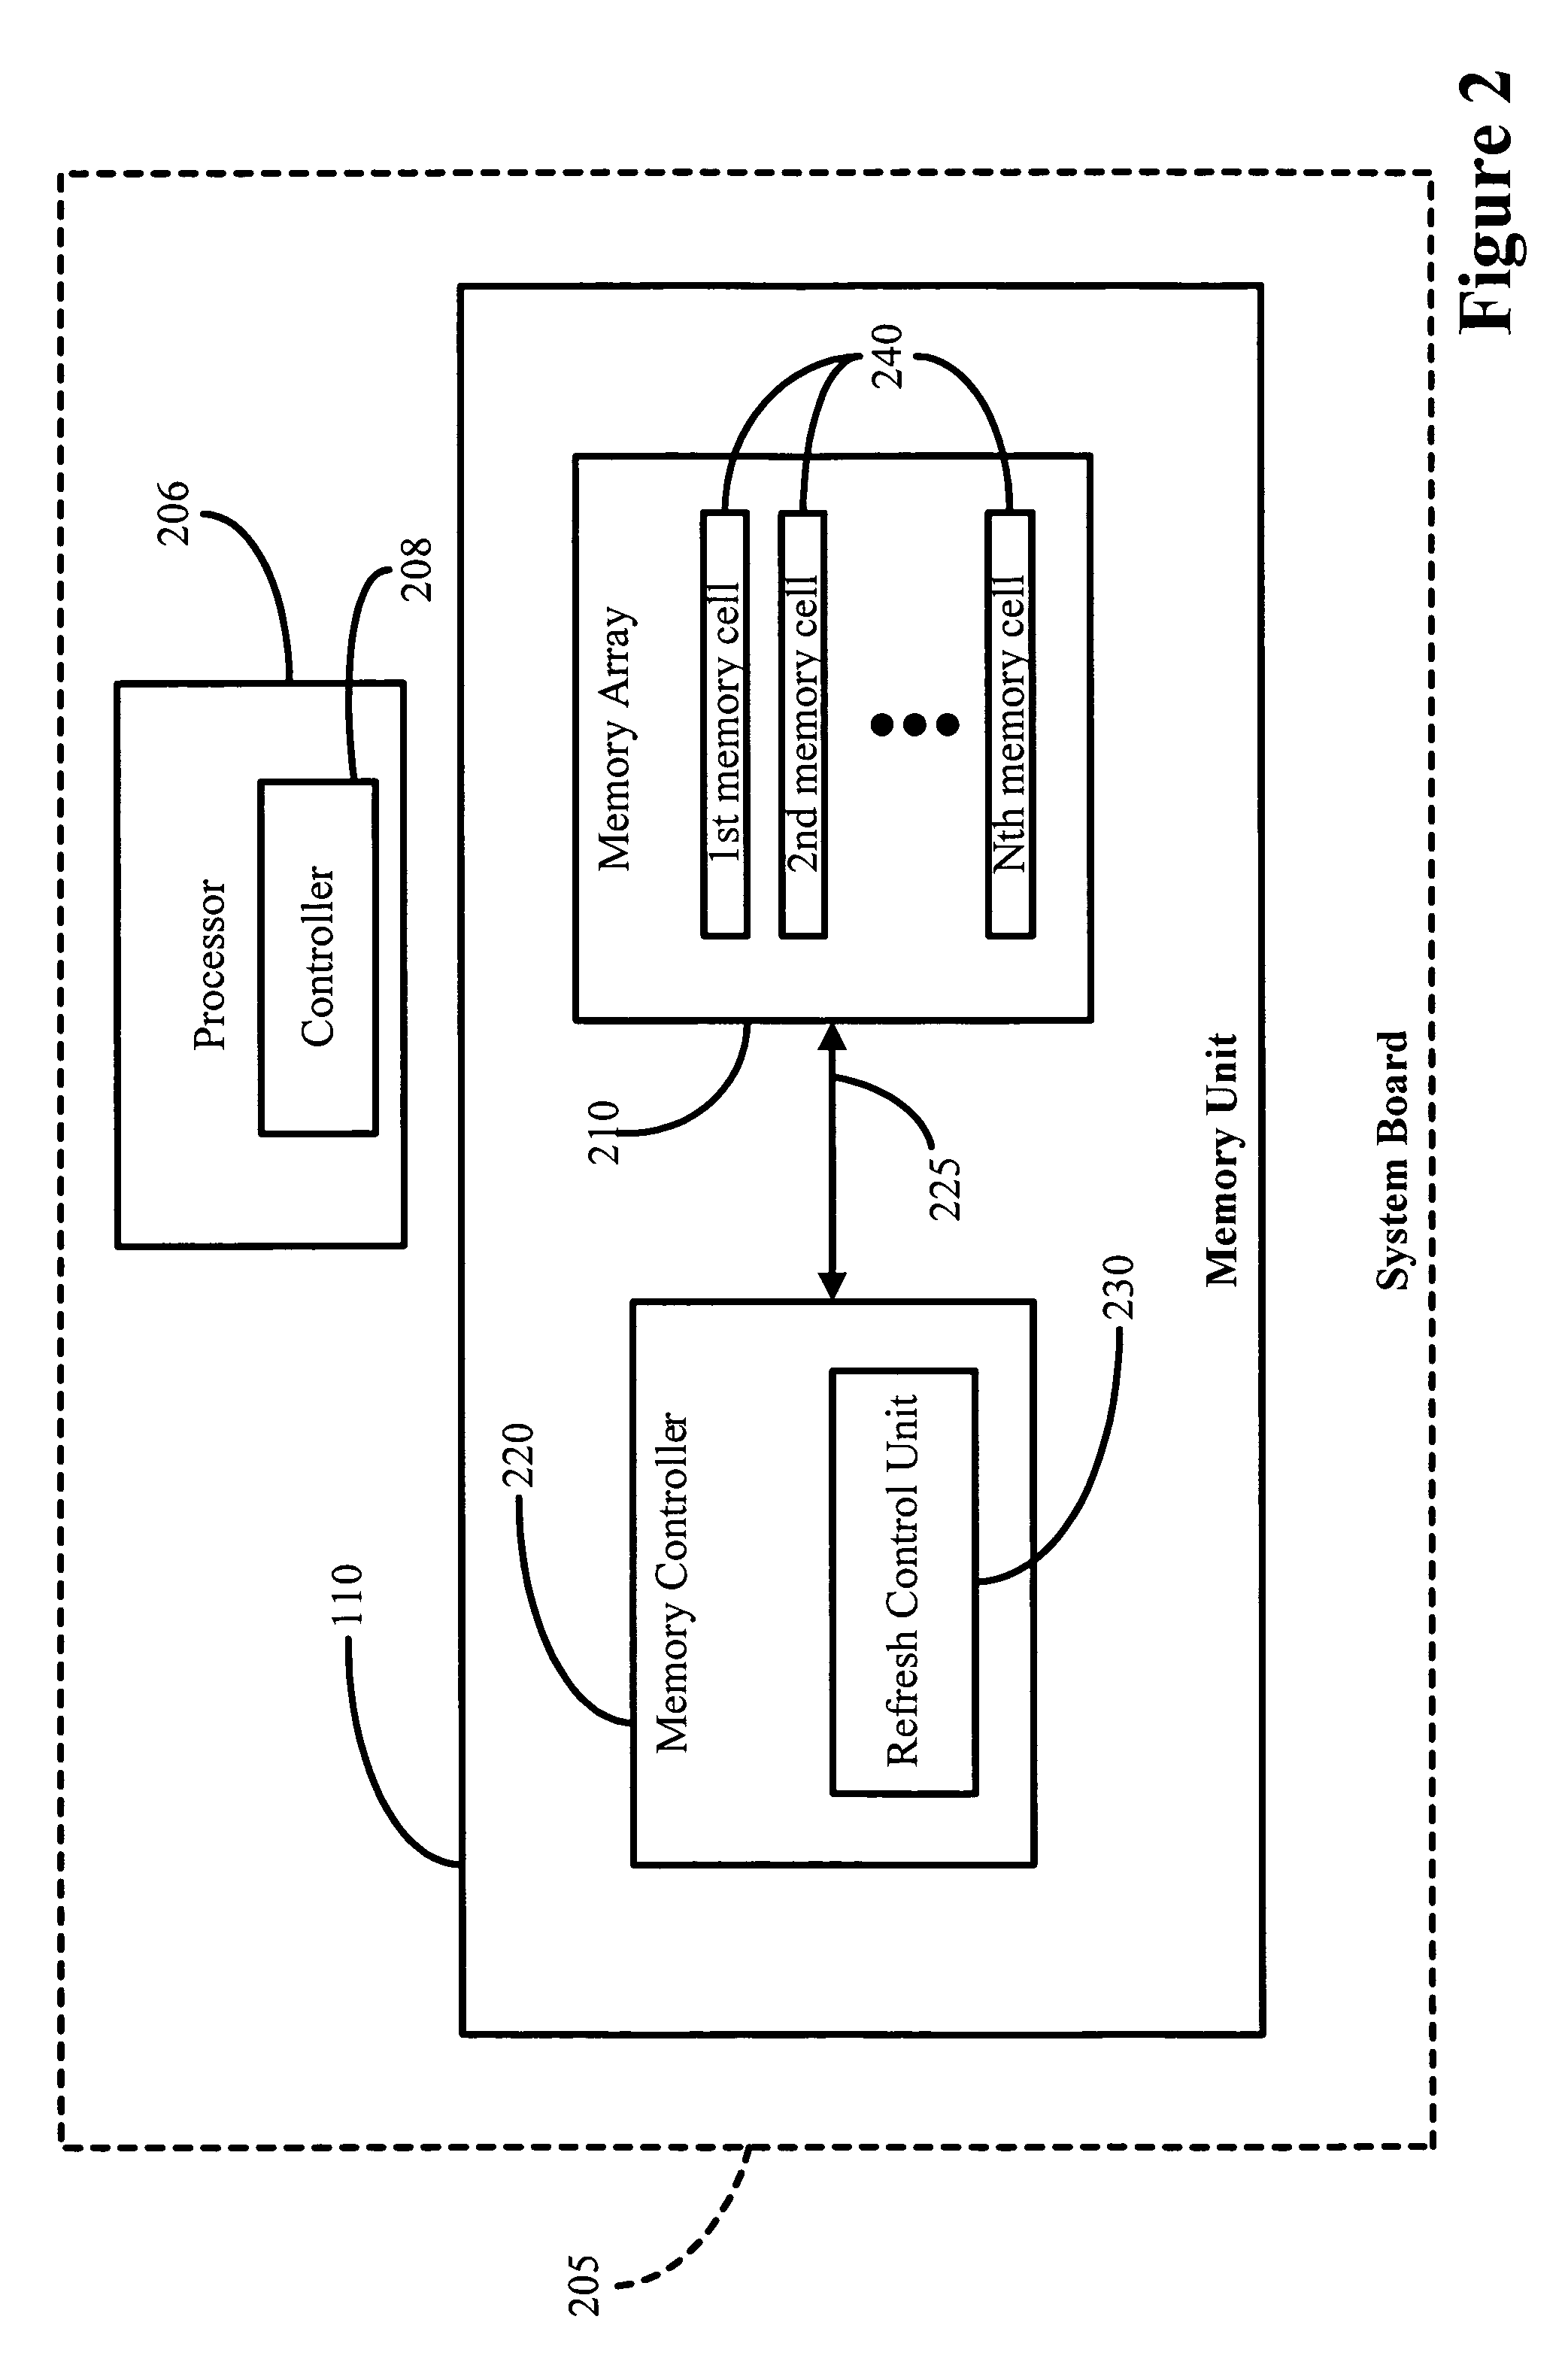 Method and apparatus for controlling refresh operations in a dynamic memory device